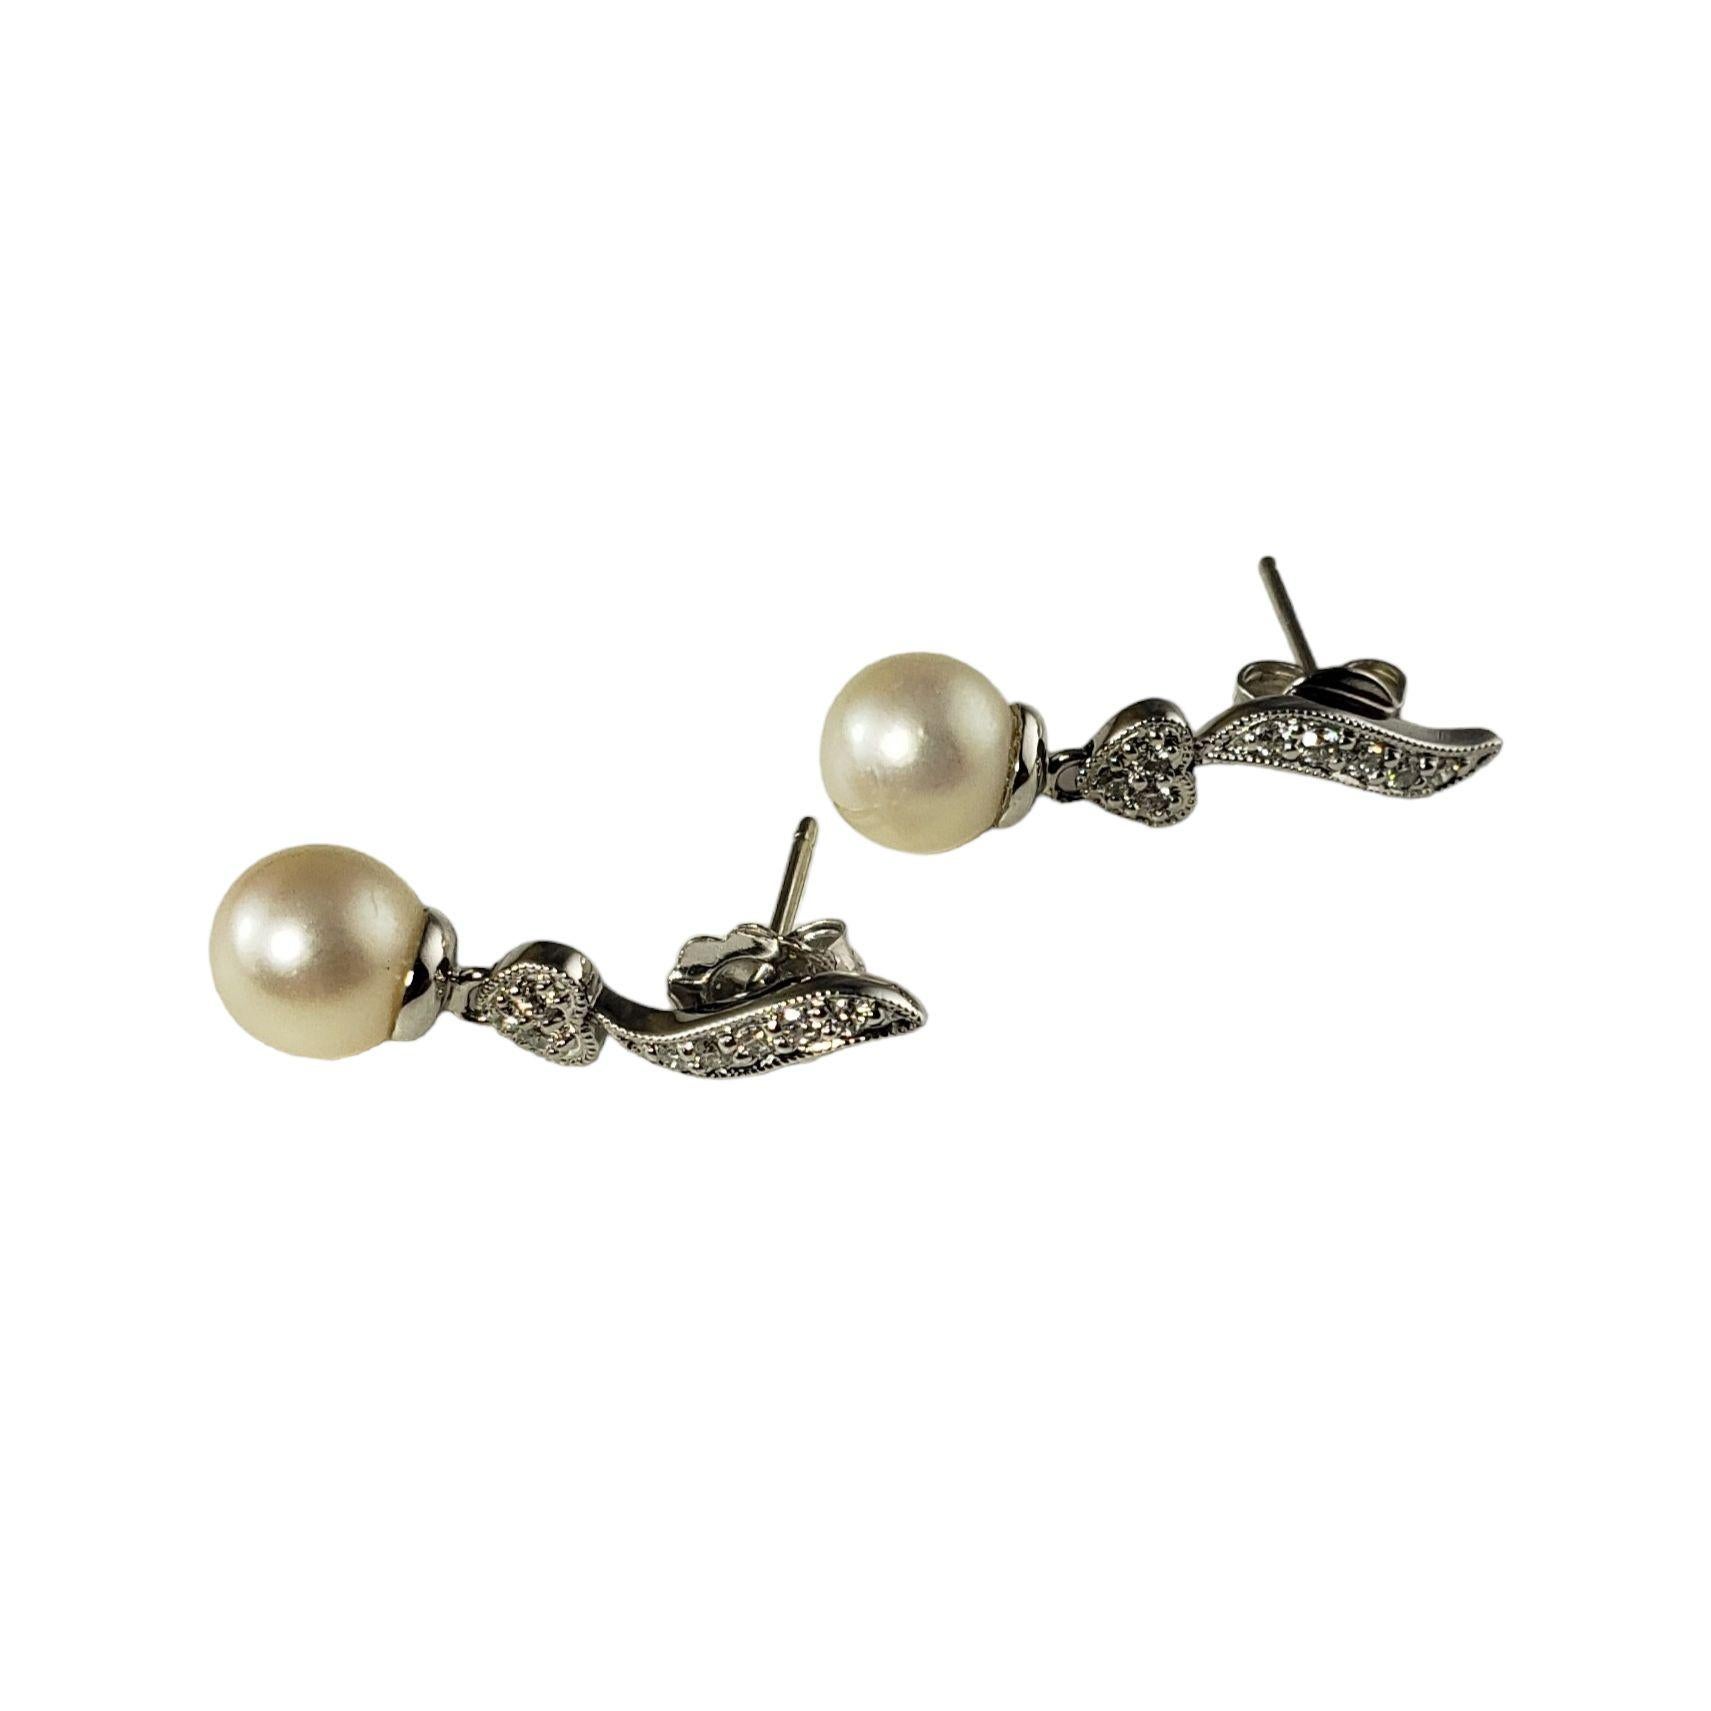  14 Karat White Gold Pearl and Diamond Earrings In Good Condition For Sale In Washington Depot, CT